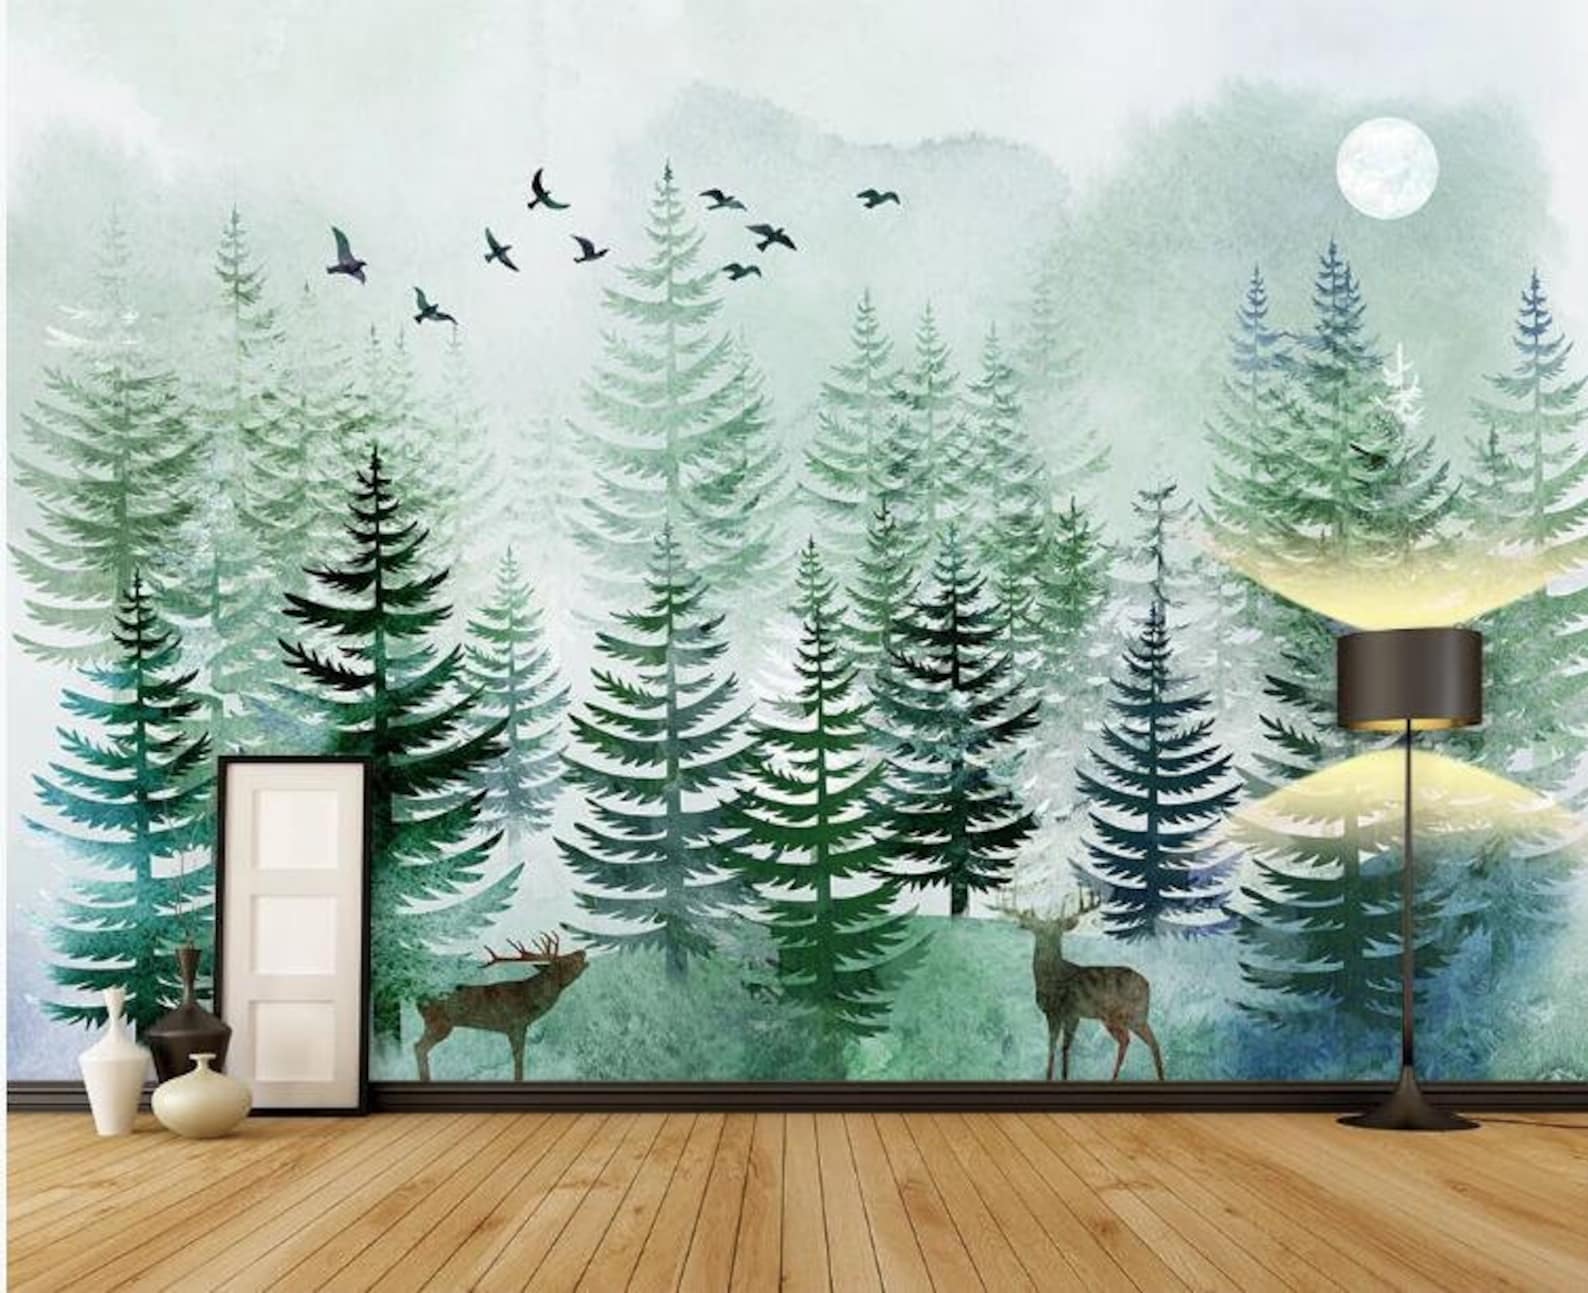 Abstract Pine Trees Wallpaper Wall Mural Green Pine Trees | Etsy